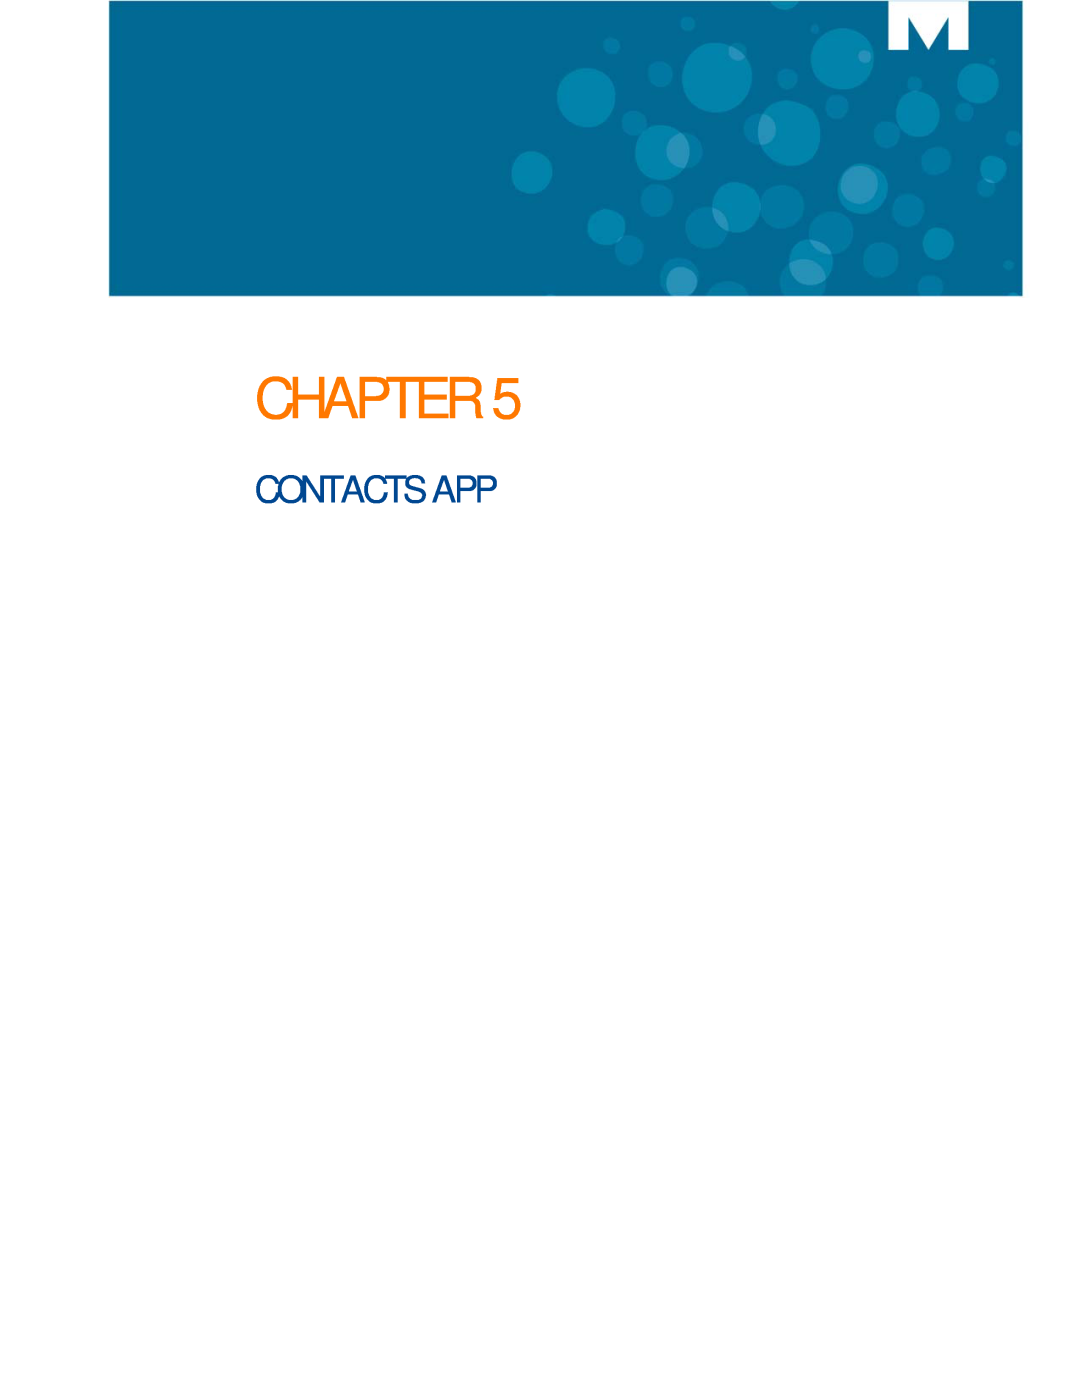 Mitel UC360 manual Contacts App, Chapter 